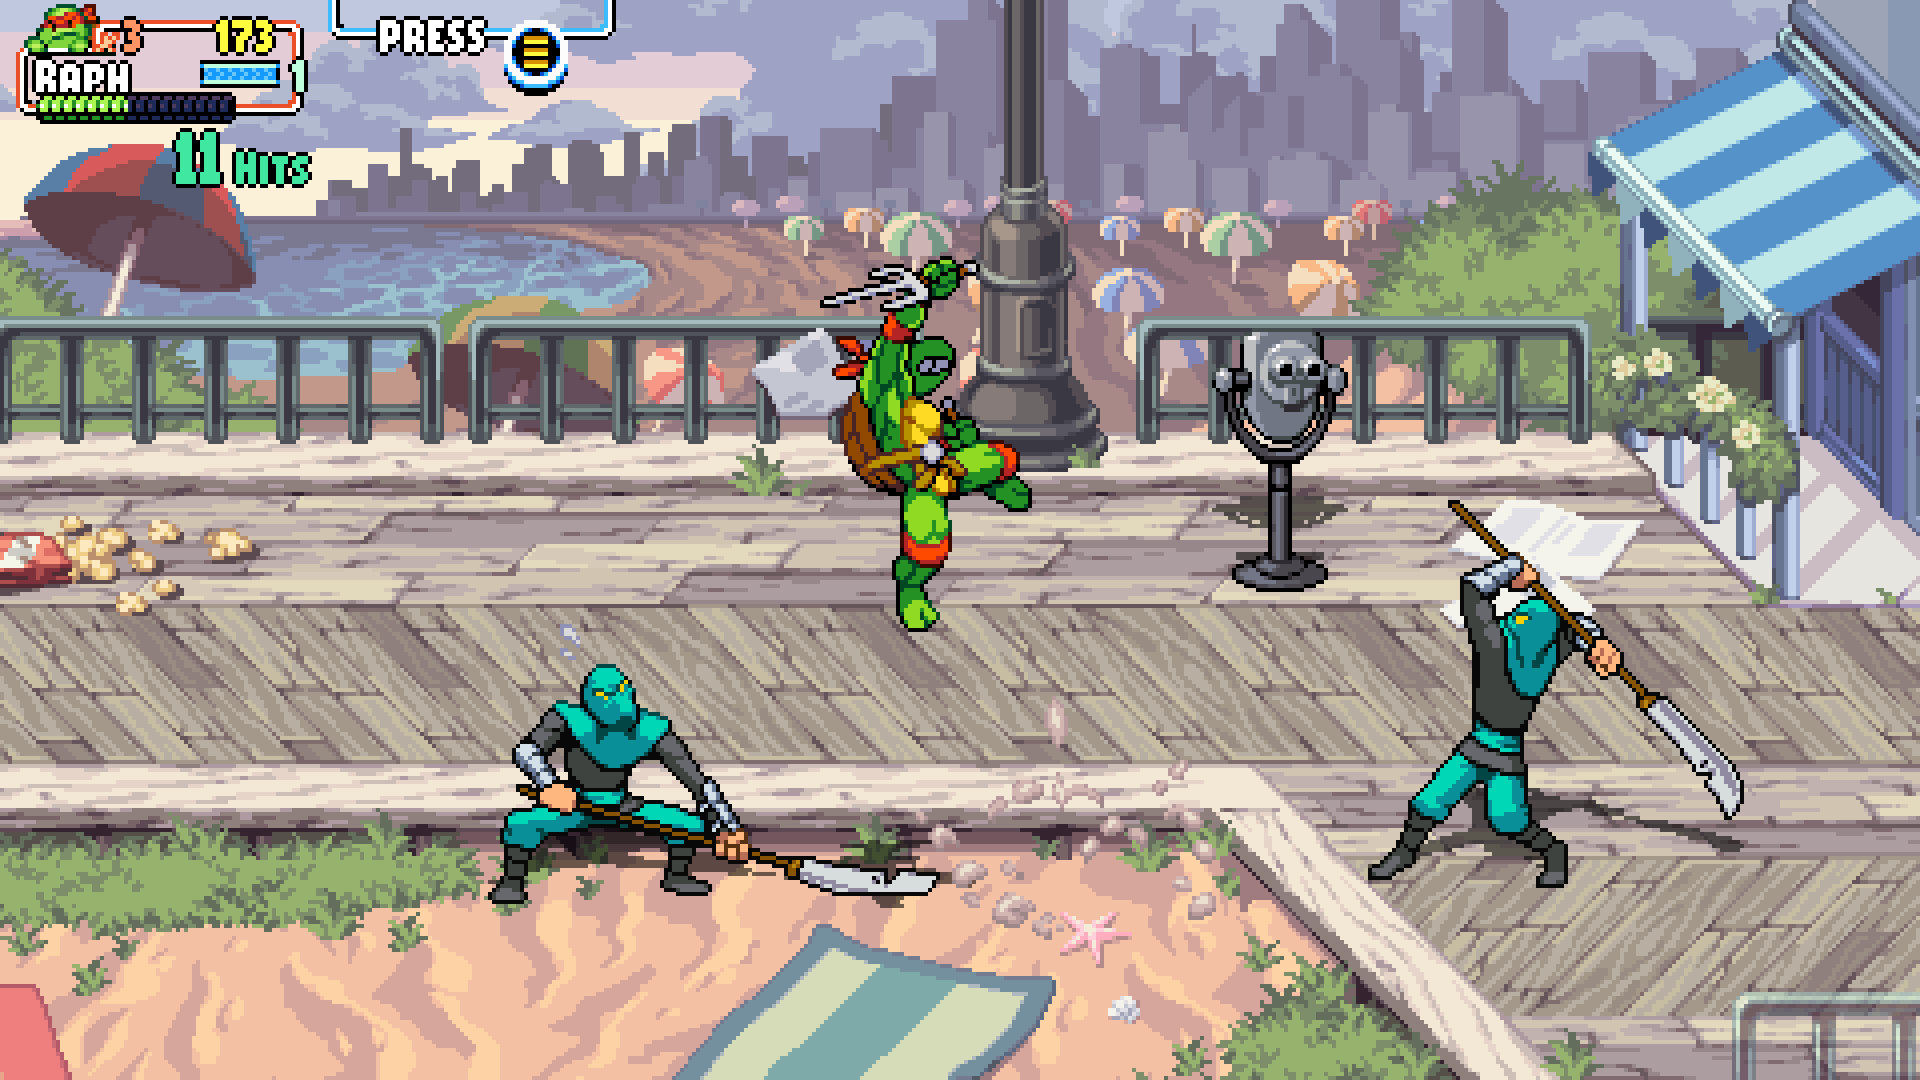 Raphael doing an uppercut while being surrounded two Foot Clan ninjas